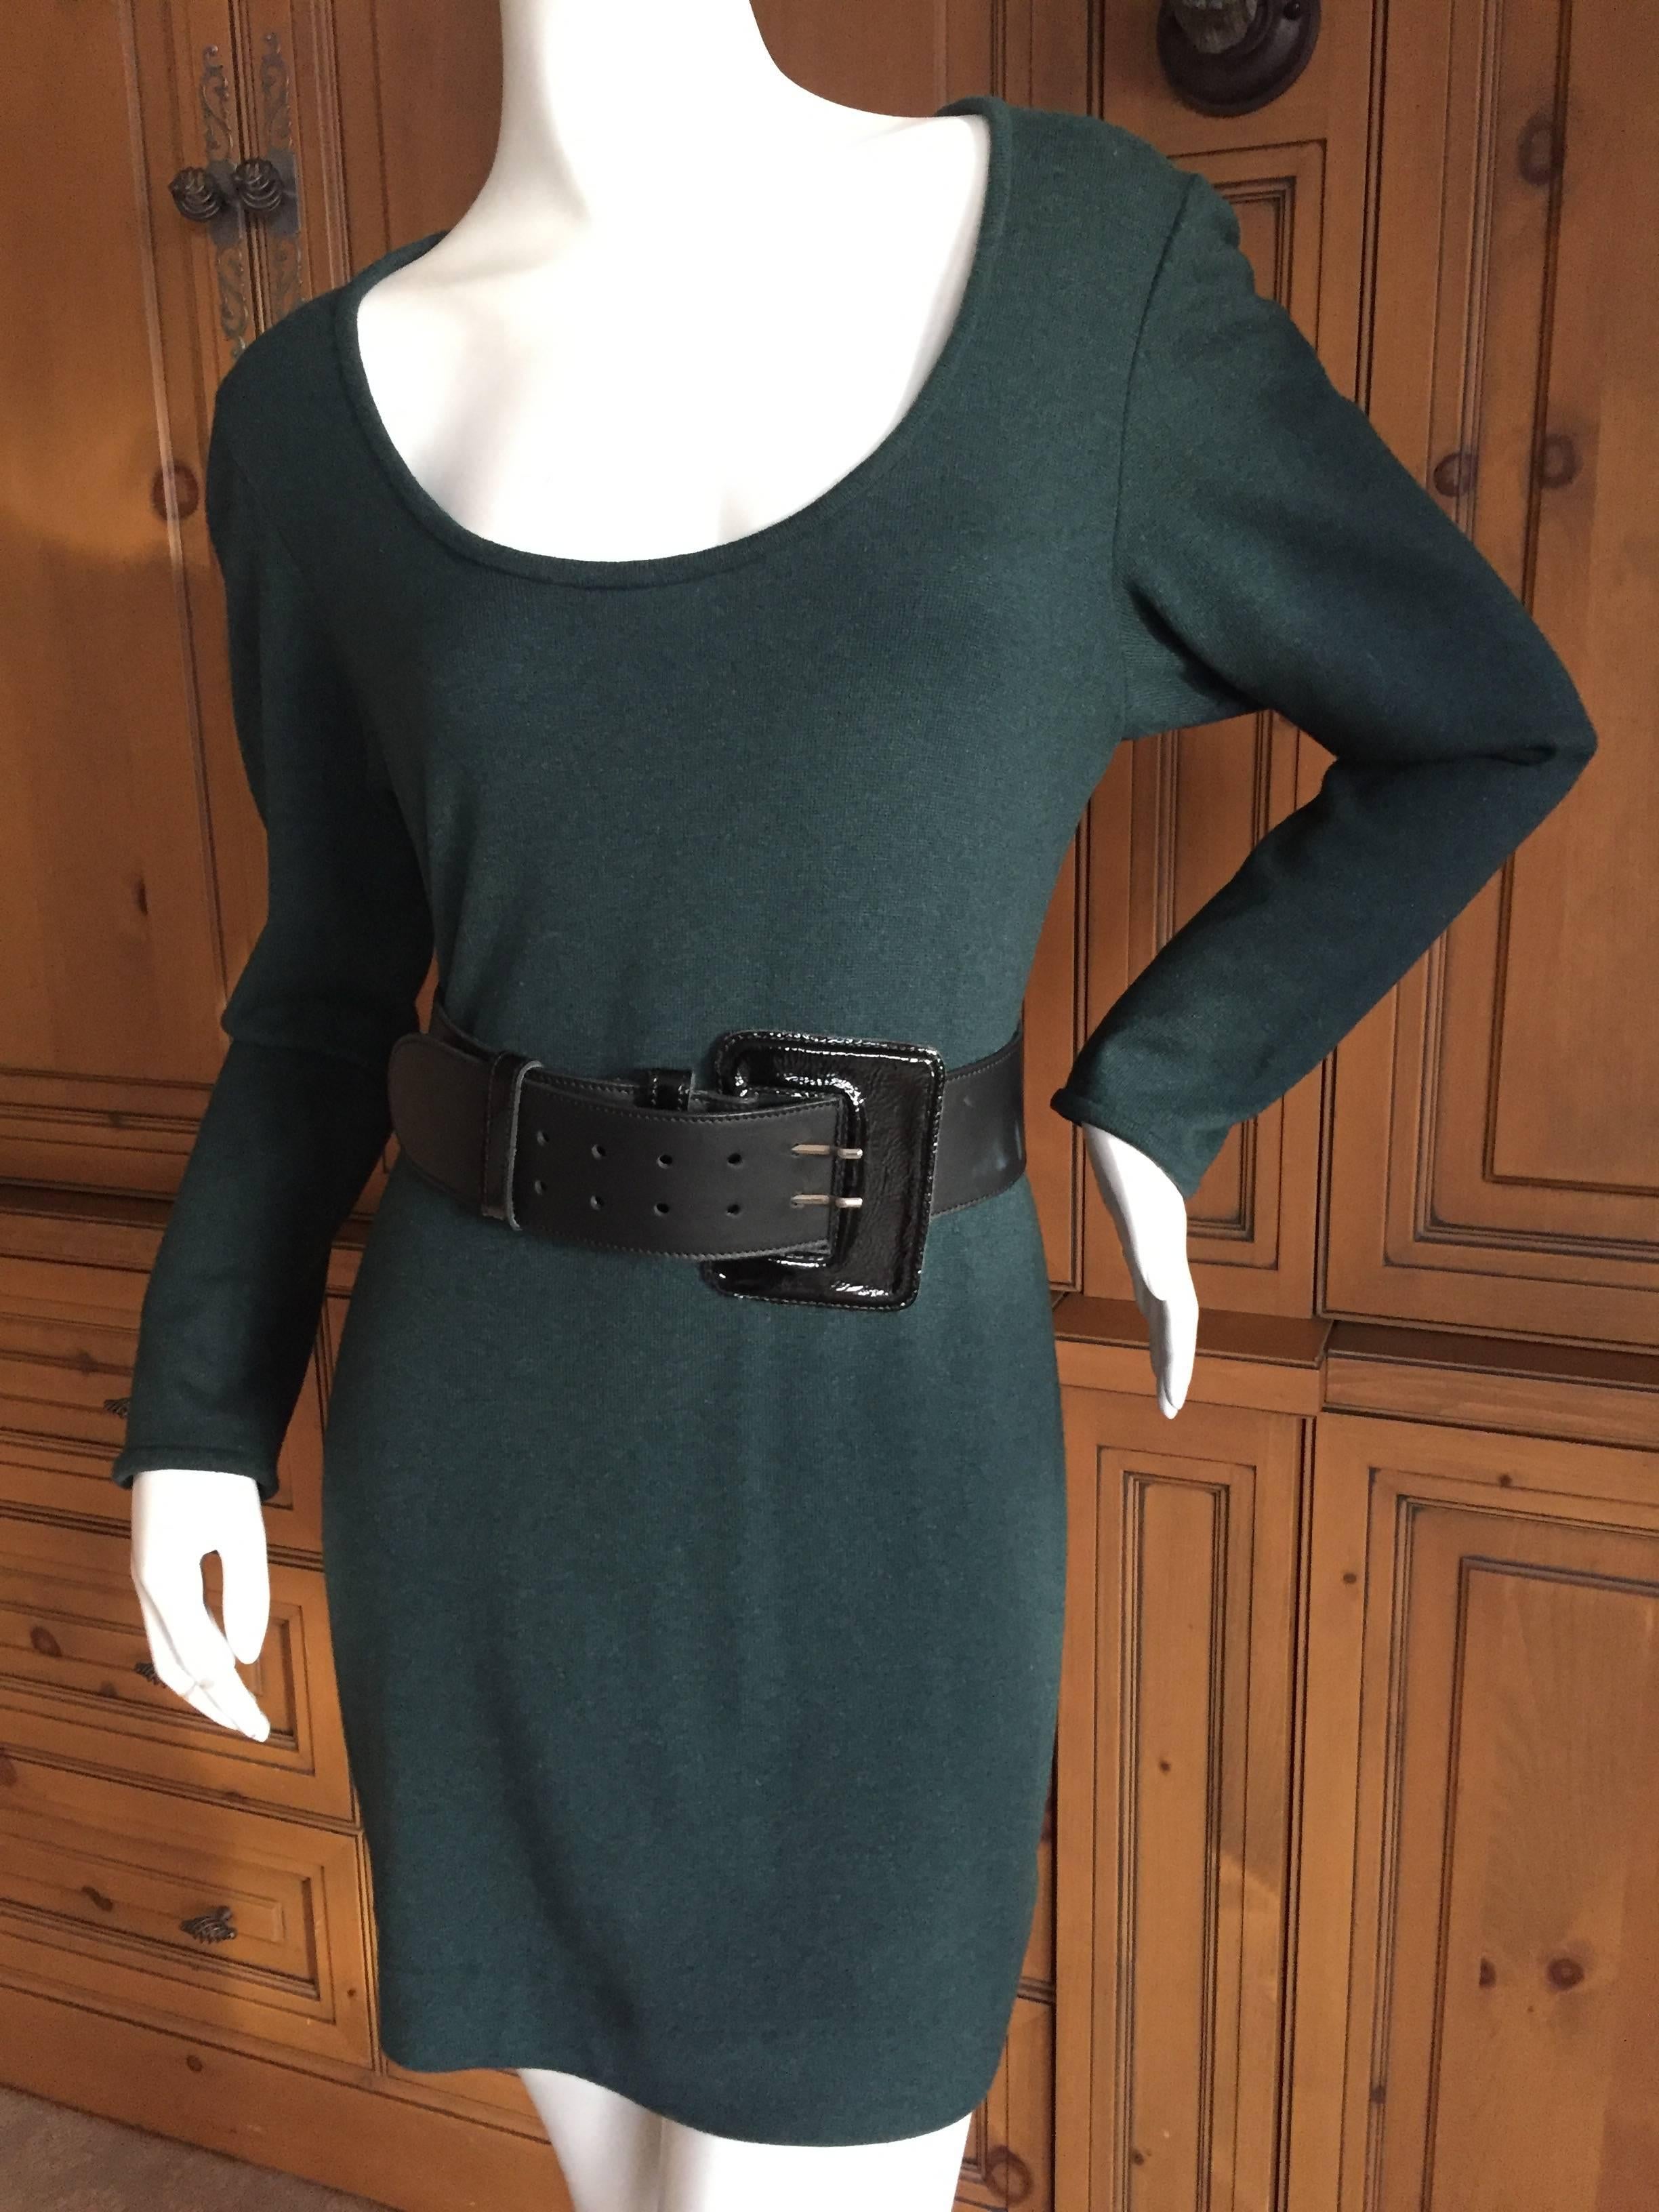 Dark green cashmere mini dress from Halston at I Magnin.
I show it belted for styling, not included with dress.
Bust 36